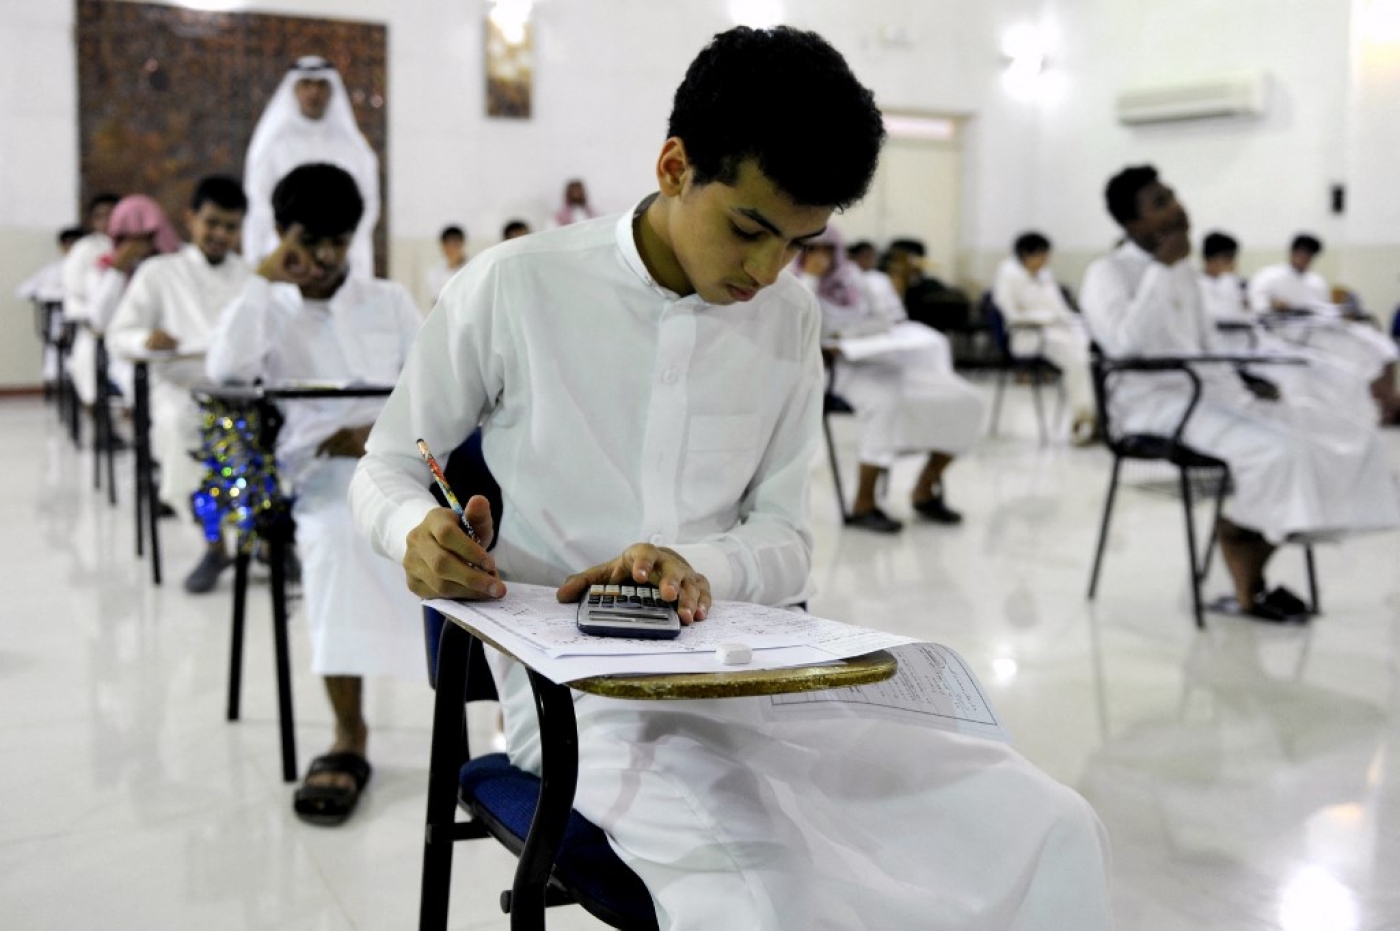 Saudi students sit for their final high school exams in Jeddah on 24 May 2015.